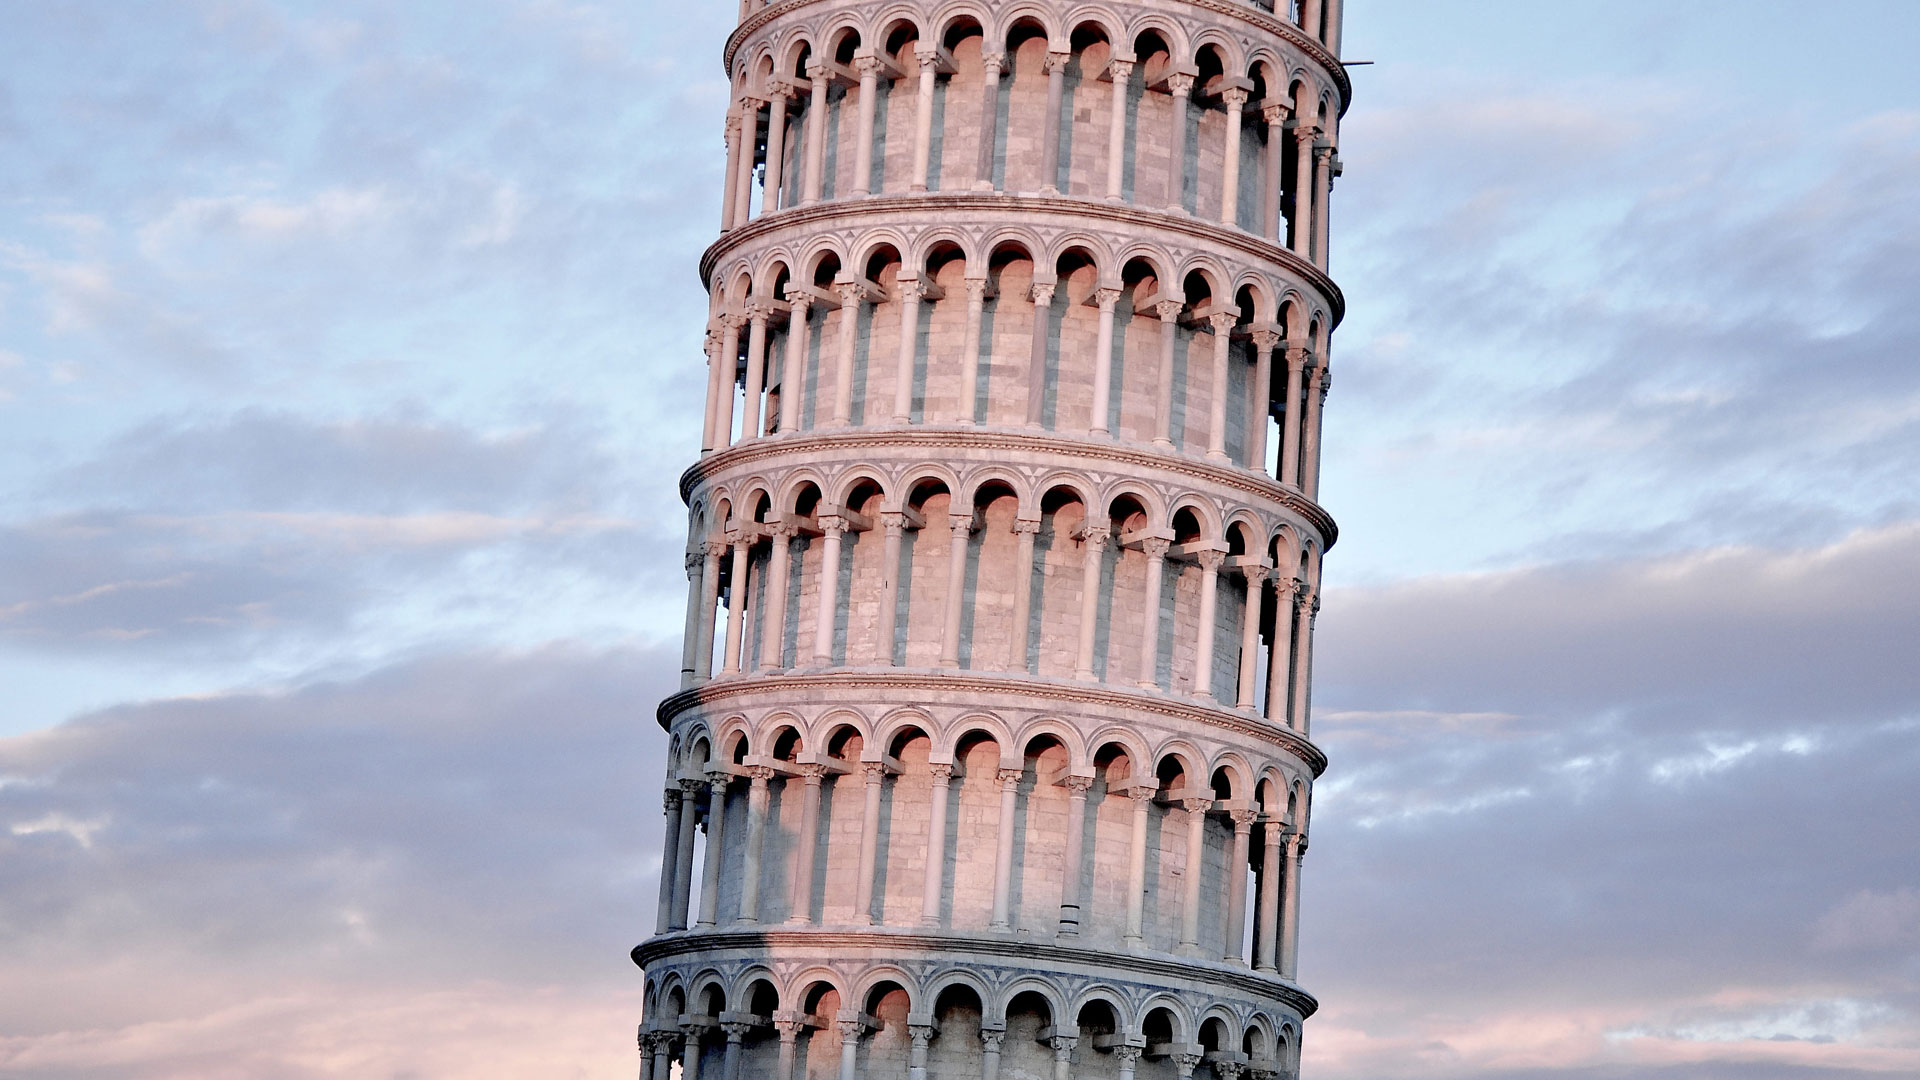 Pisa leaning tower picture